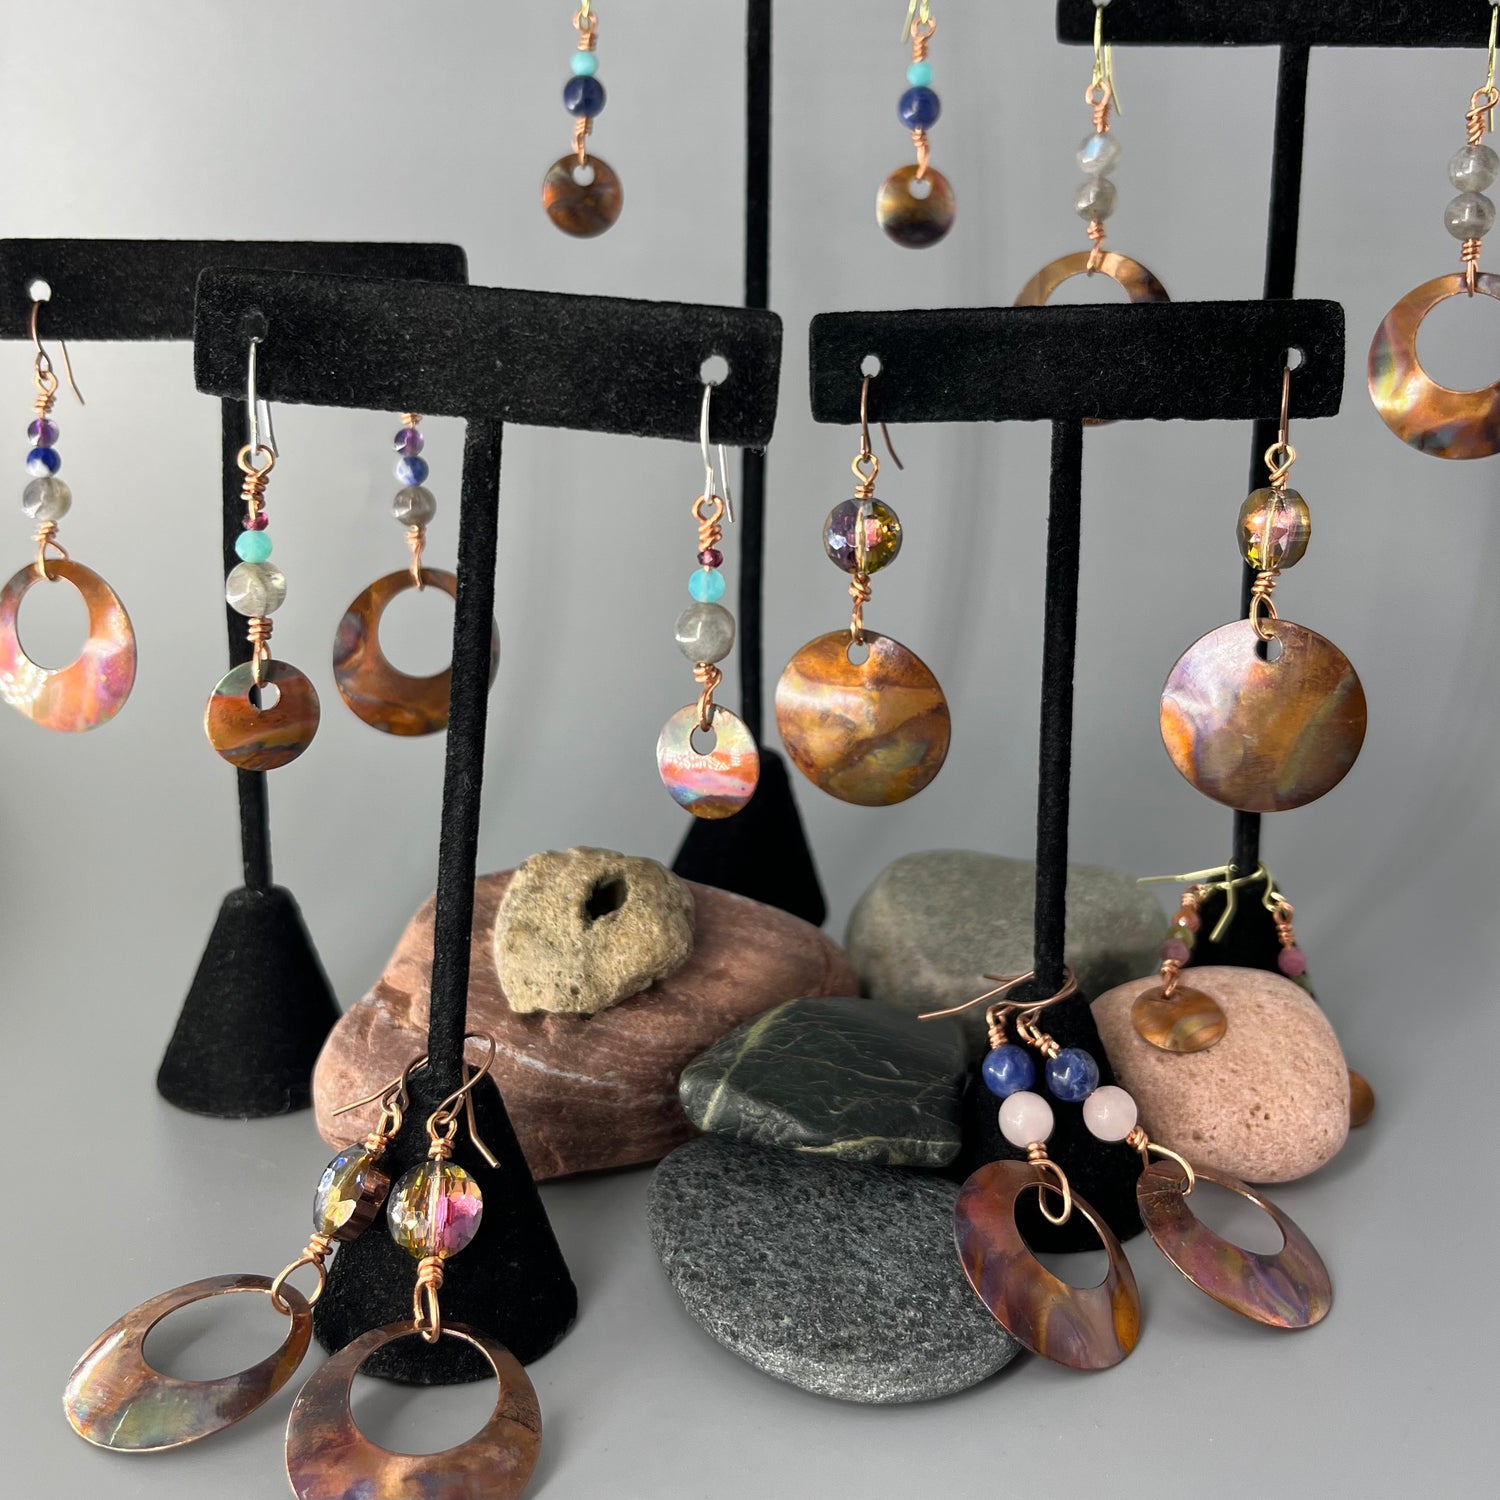 Selection of copper dangle earrings accented with stone and glass.